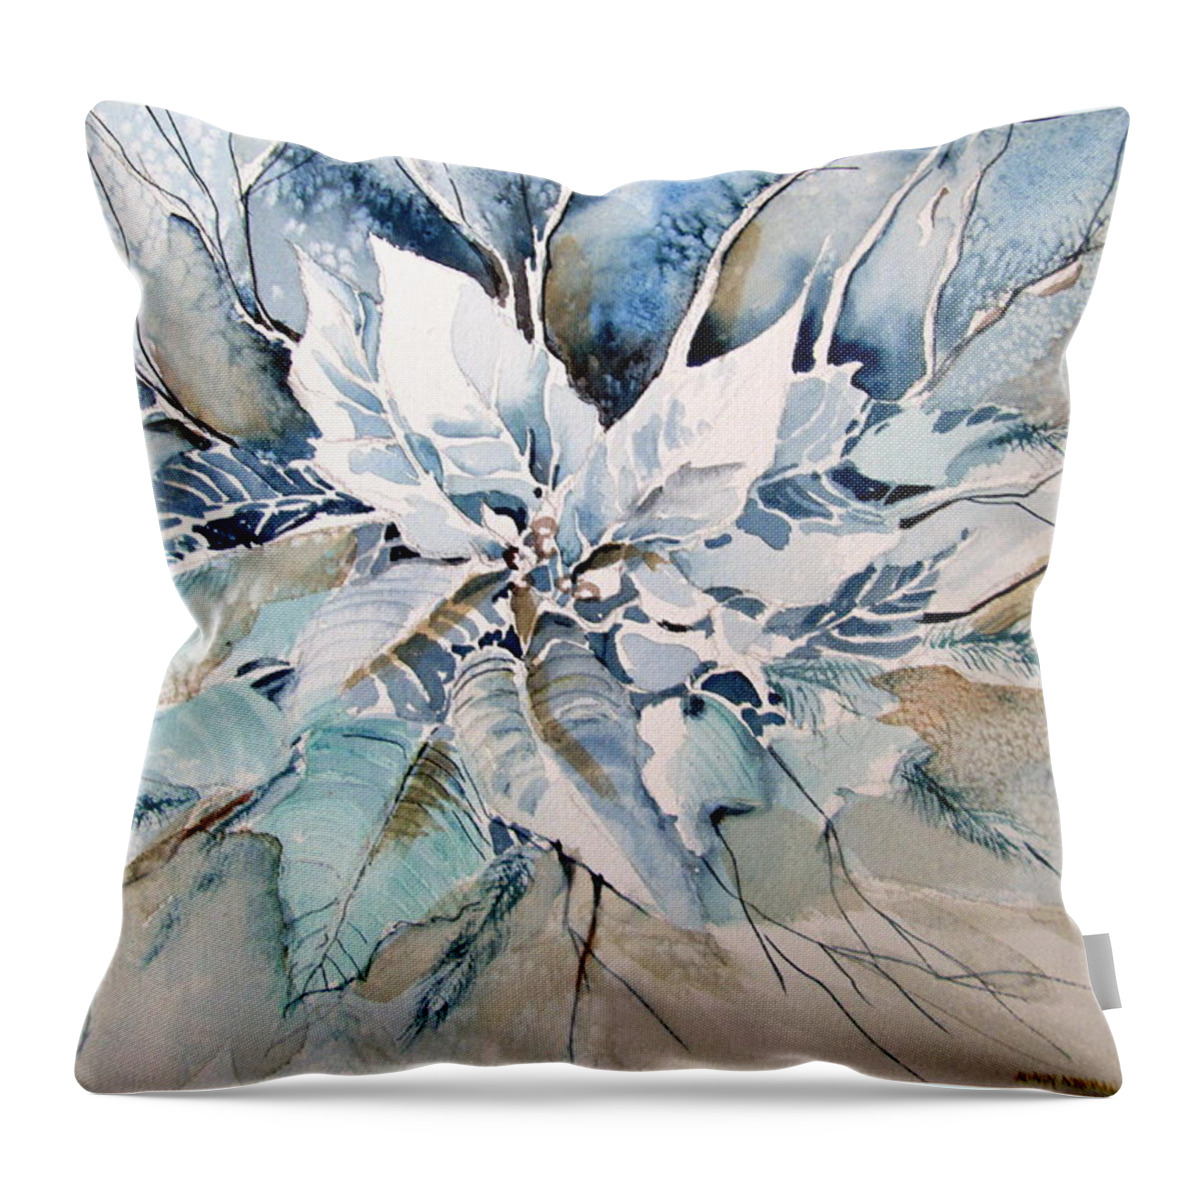 Poinsettia Throw Pillow featuring the painting Blue Poinsettia by Mindy Newman